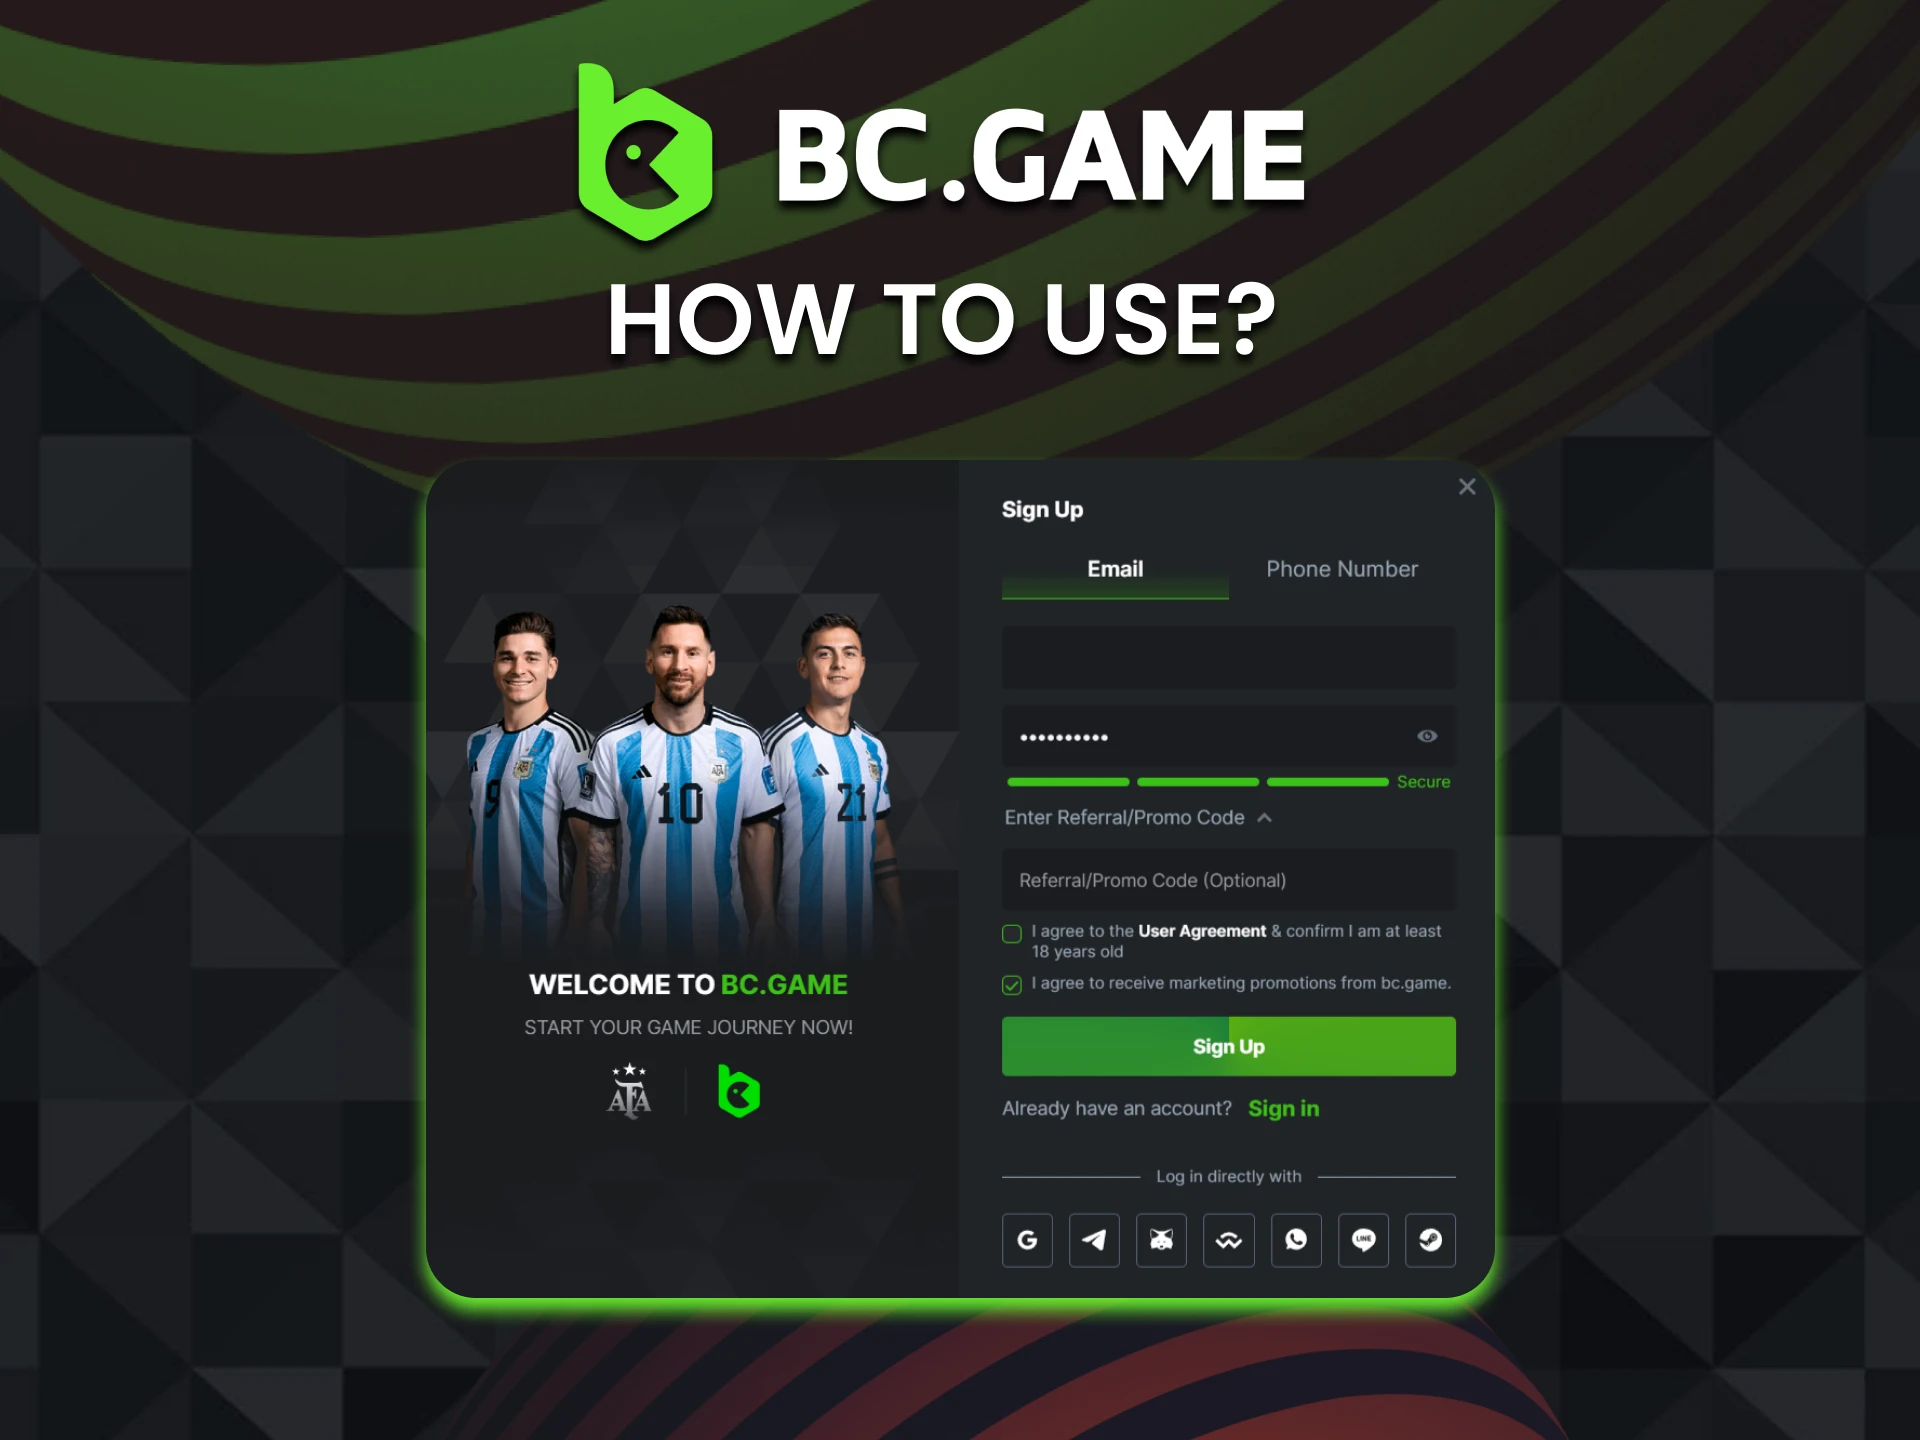 Enter the BC Game bonus code in the appropriate field when registering an account.